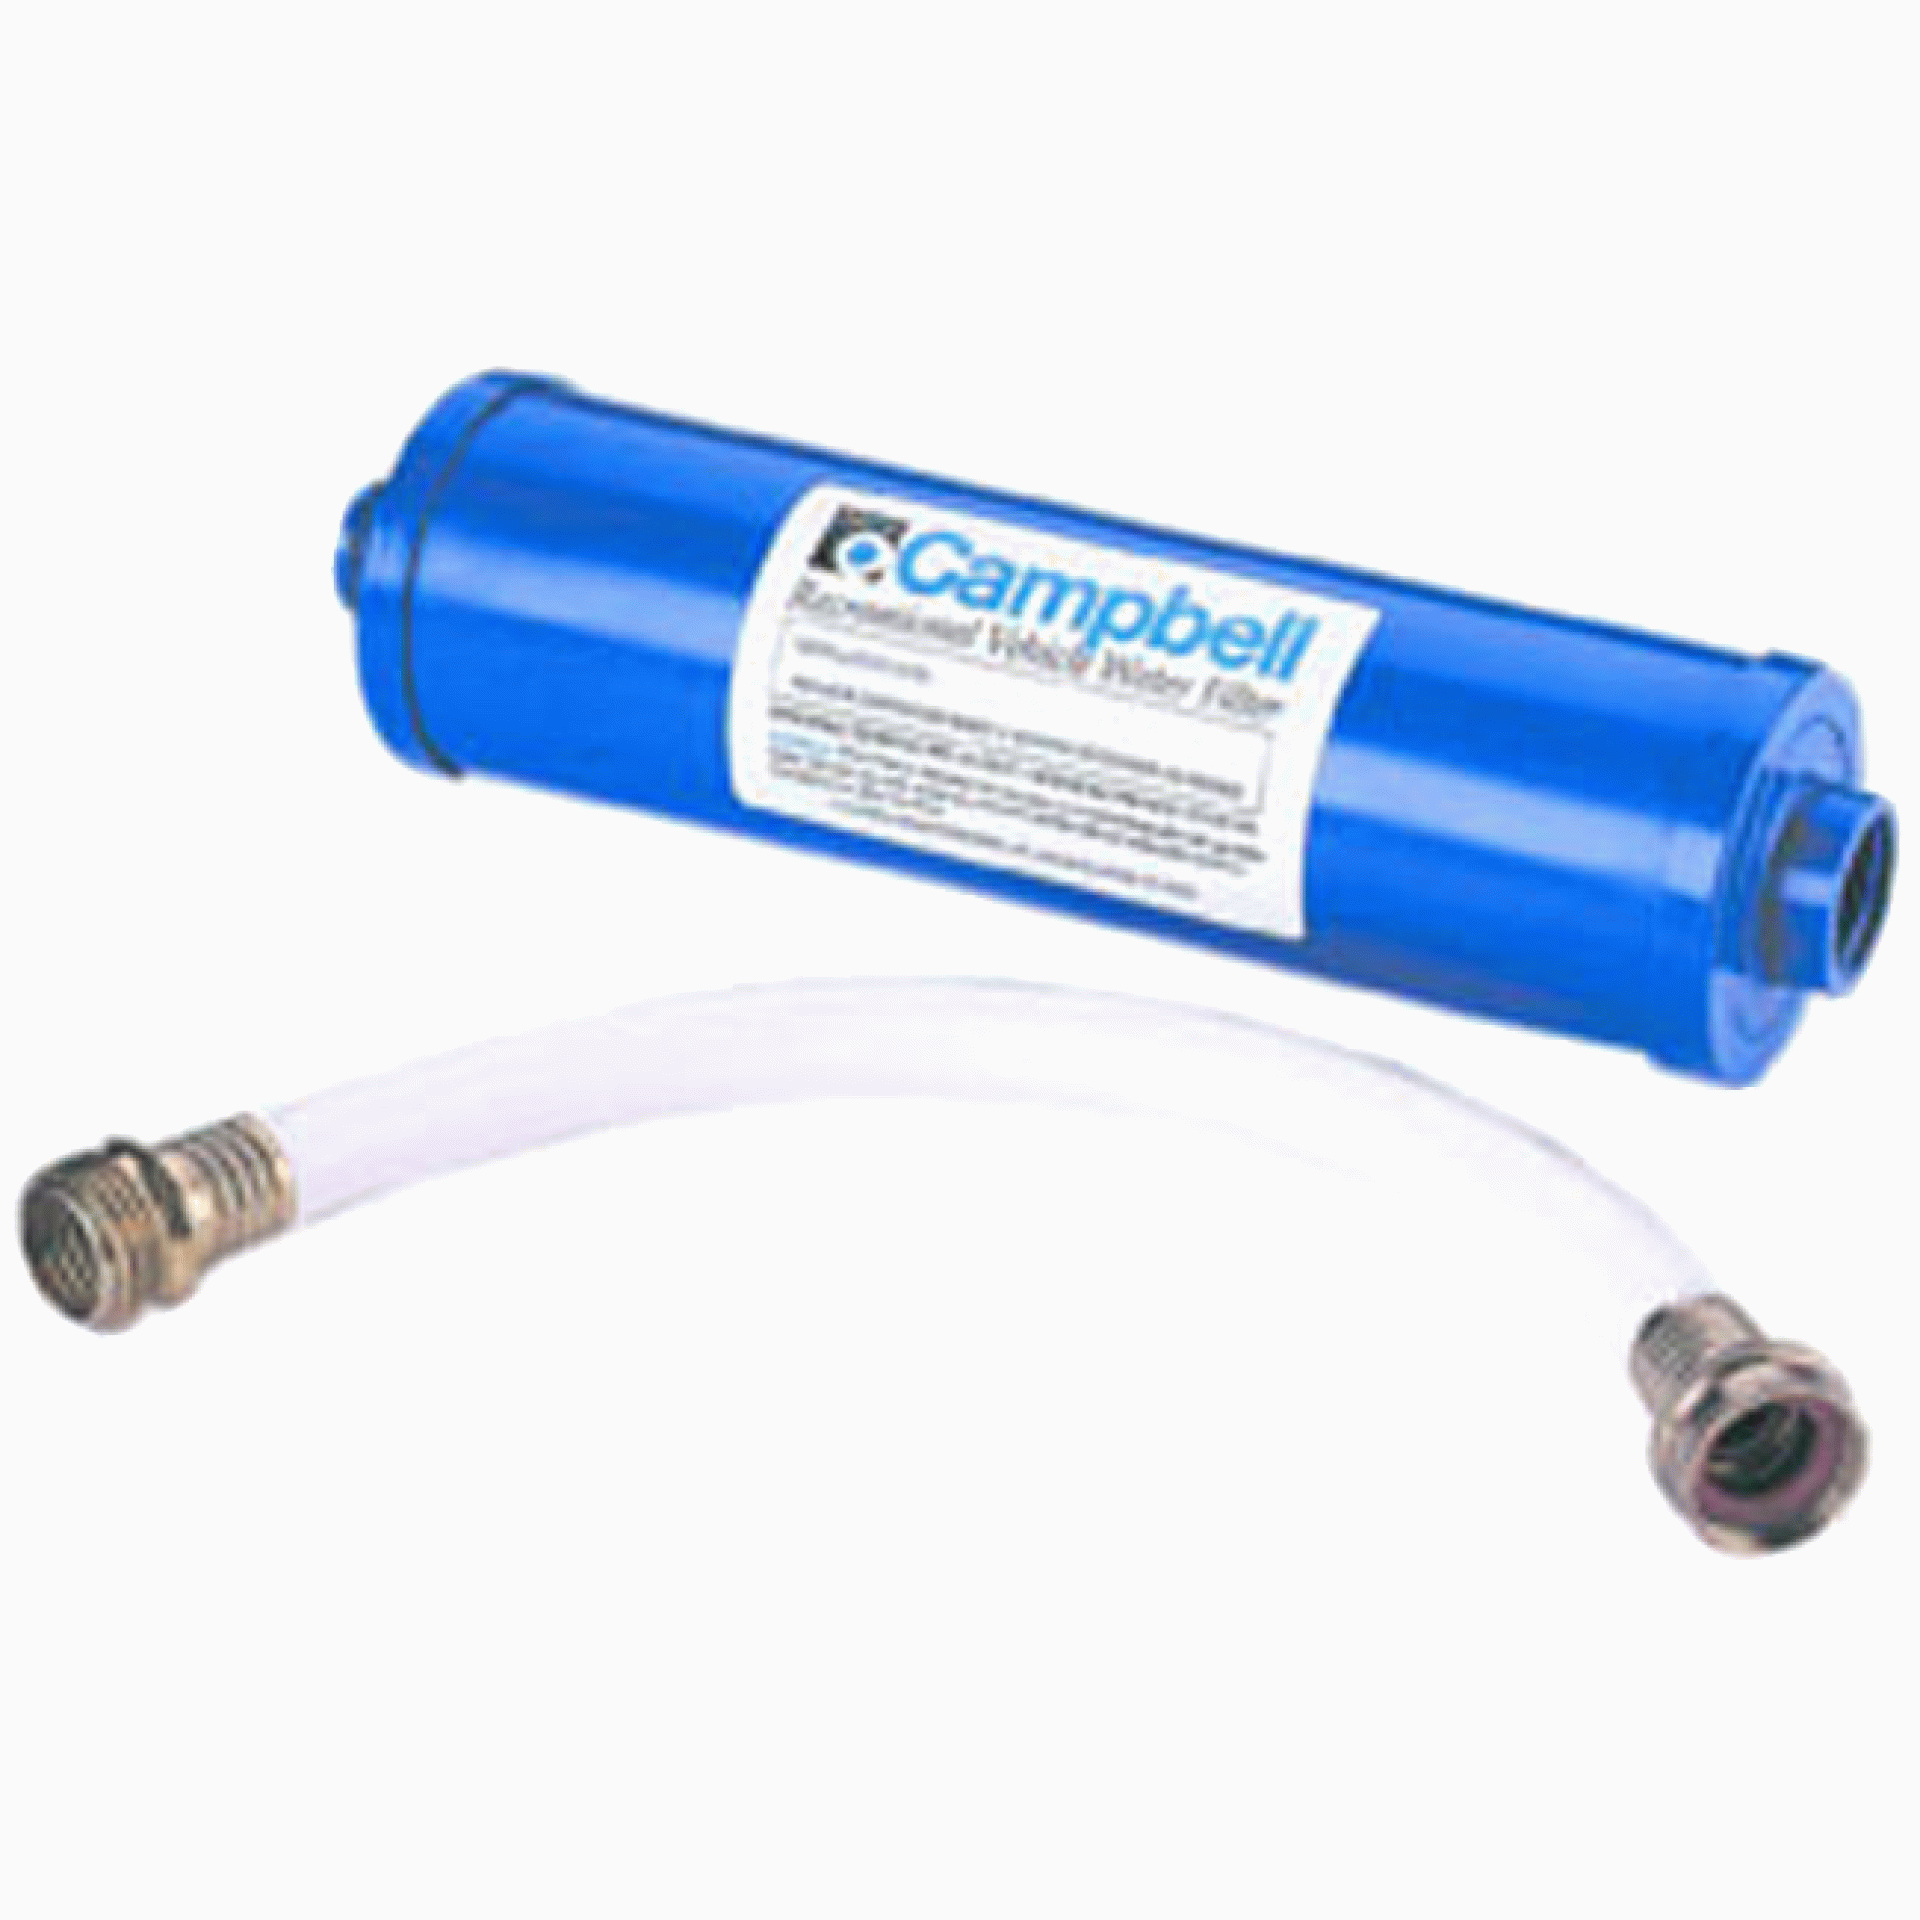 CAMPBELL MANUFACT.INC. | RVDH-34 | DISPOSABLE PRE-TANK WATER FILTER - WITH HOSE